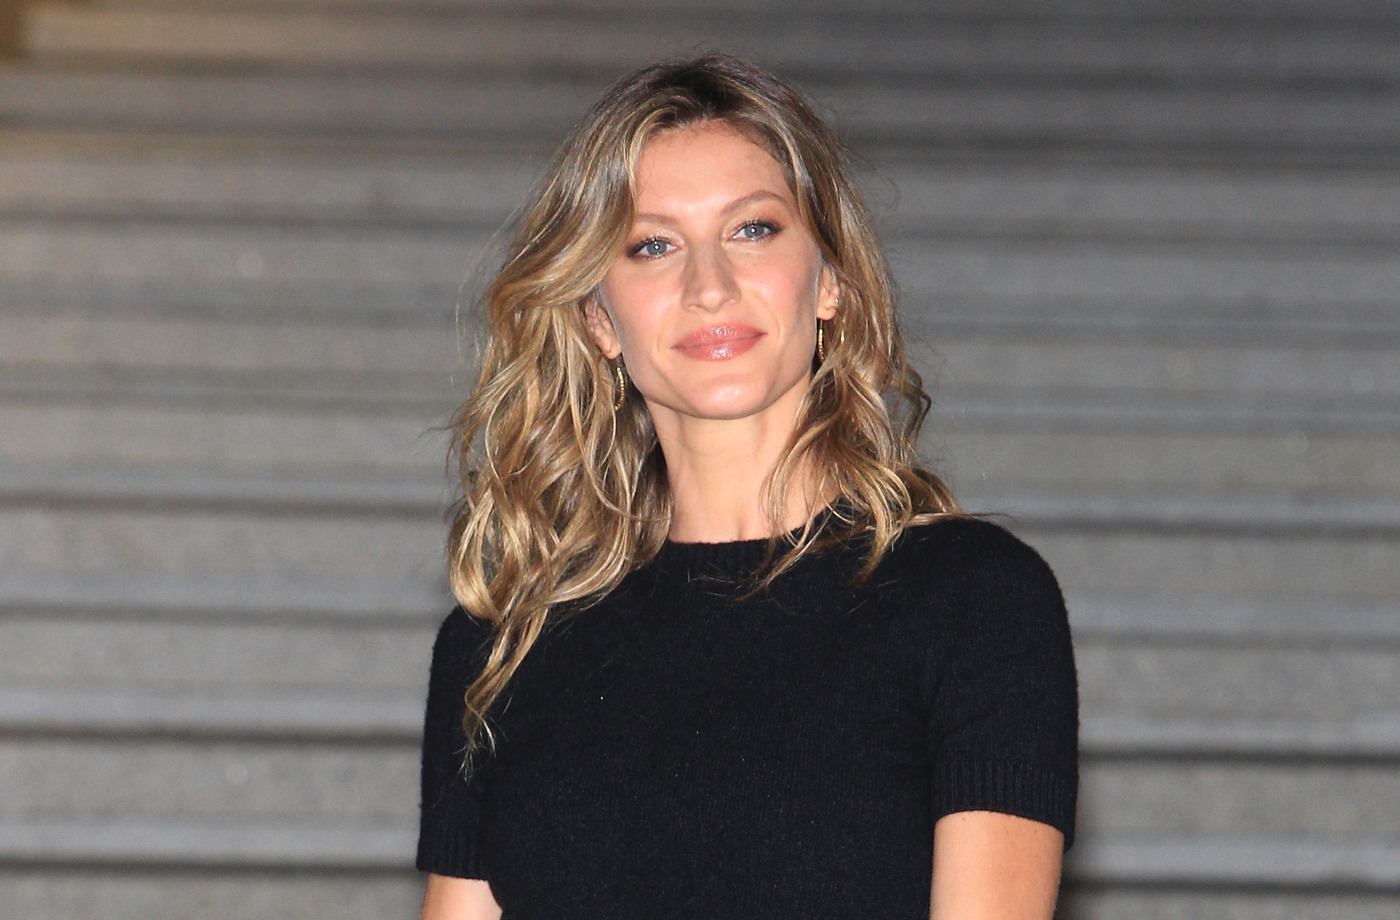 Gisele Bündchen gets real about her guilt for struggling with debilitating anxiety, despite all her success